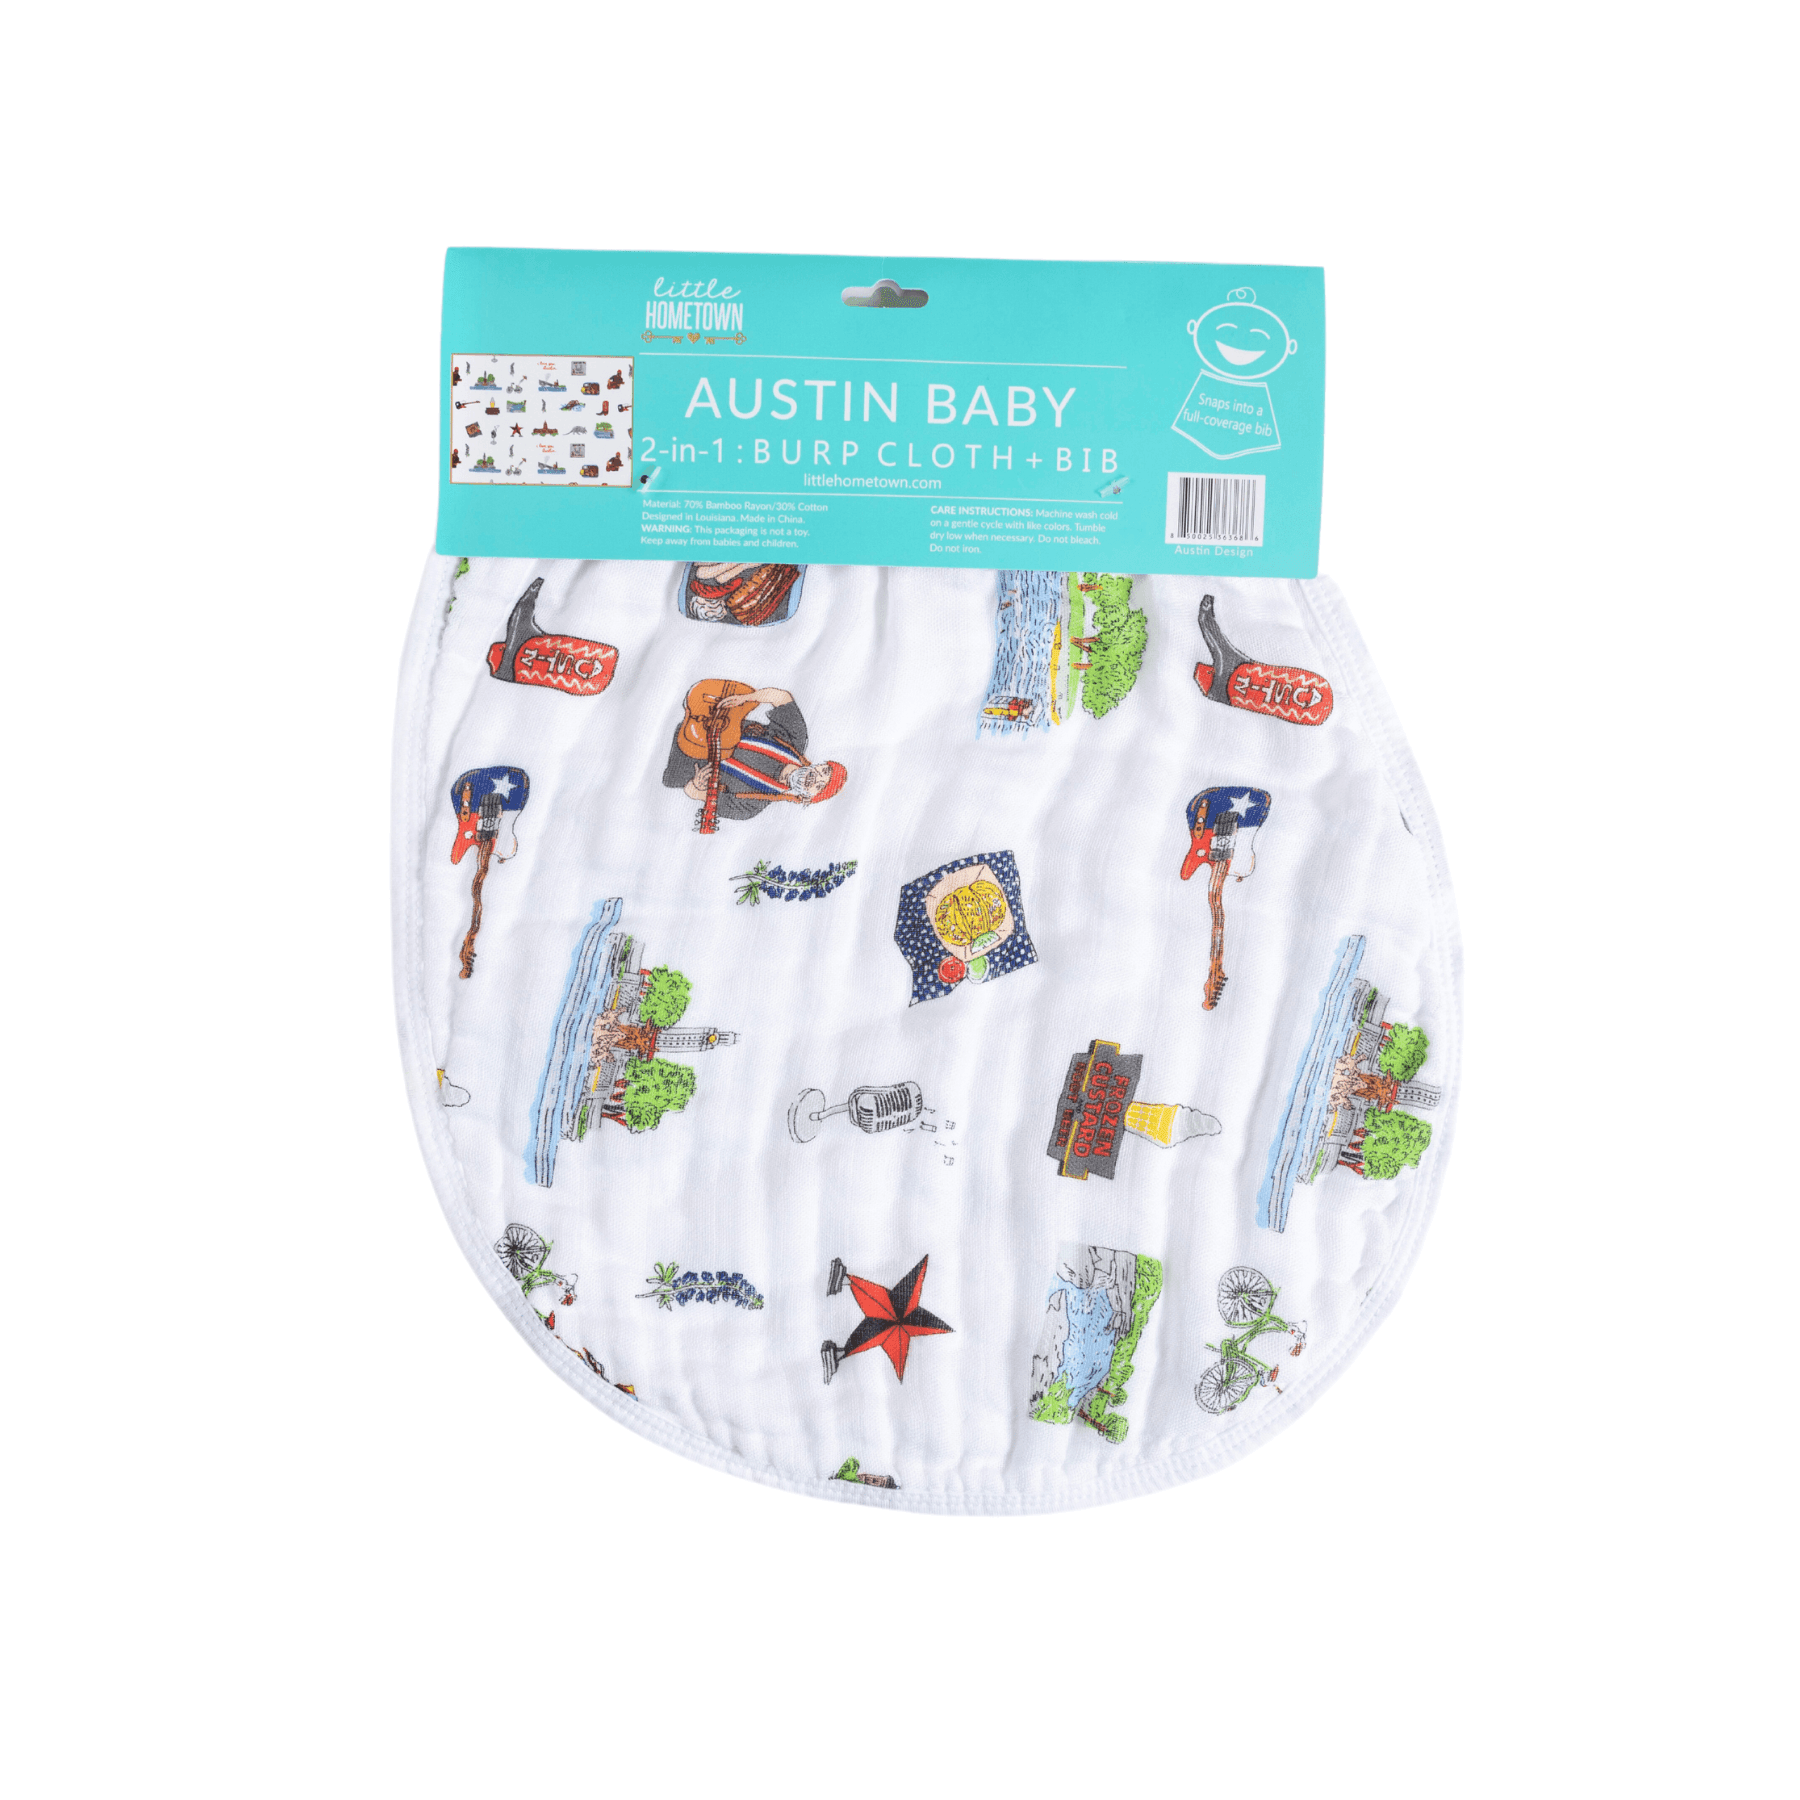 Austin-themed baby gift set with muslin swaddle blanket and burp cloth, featuring Texas icons and landmarks.